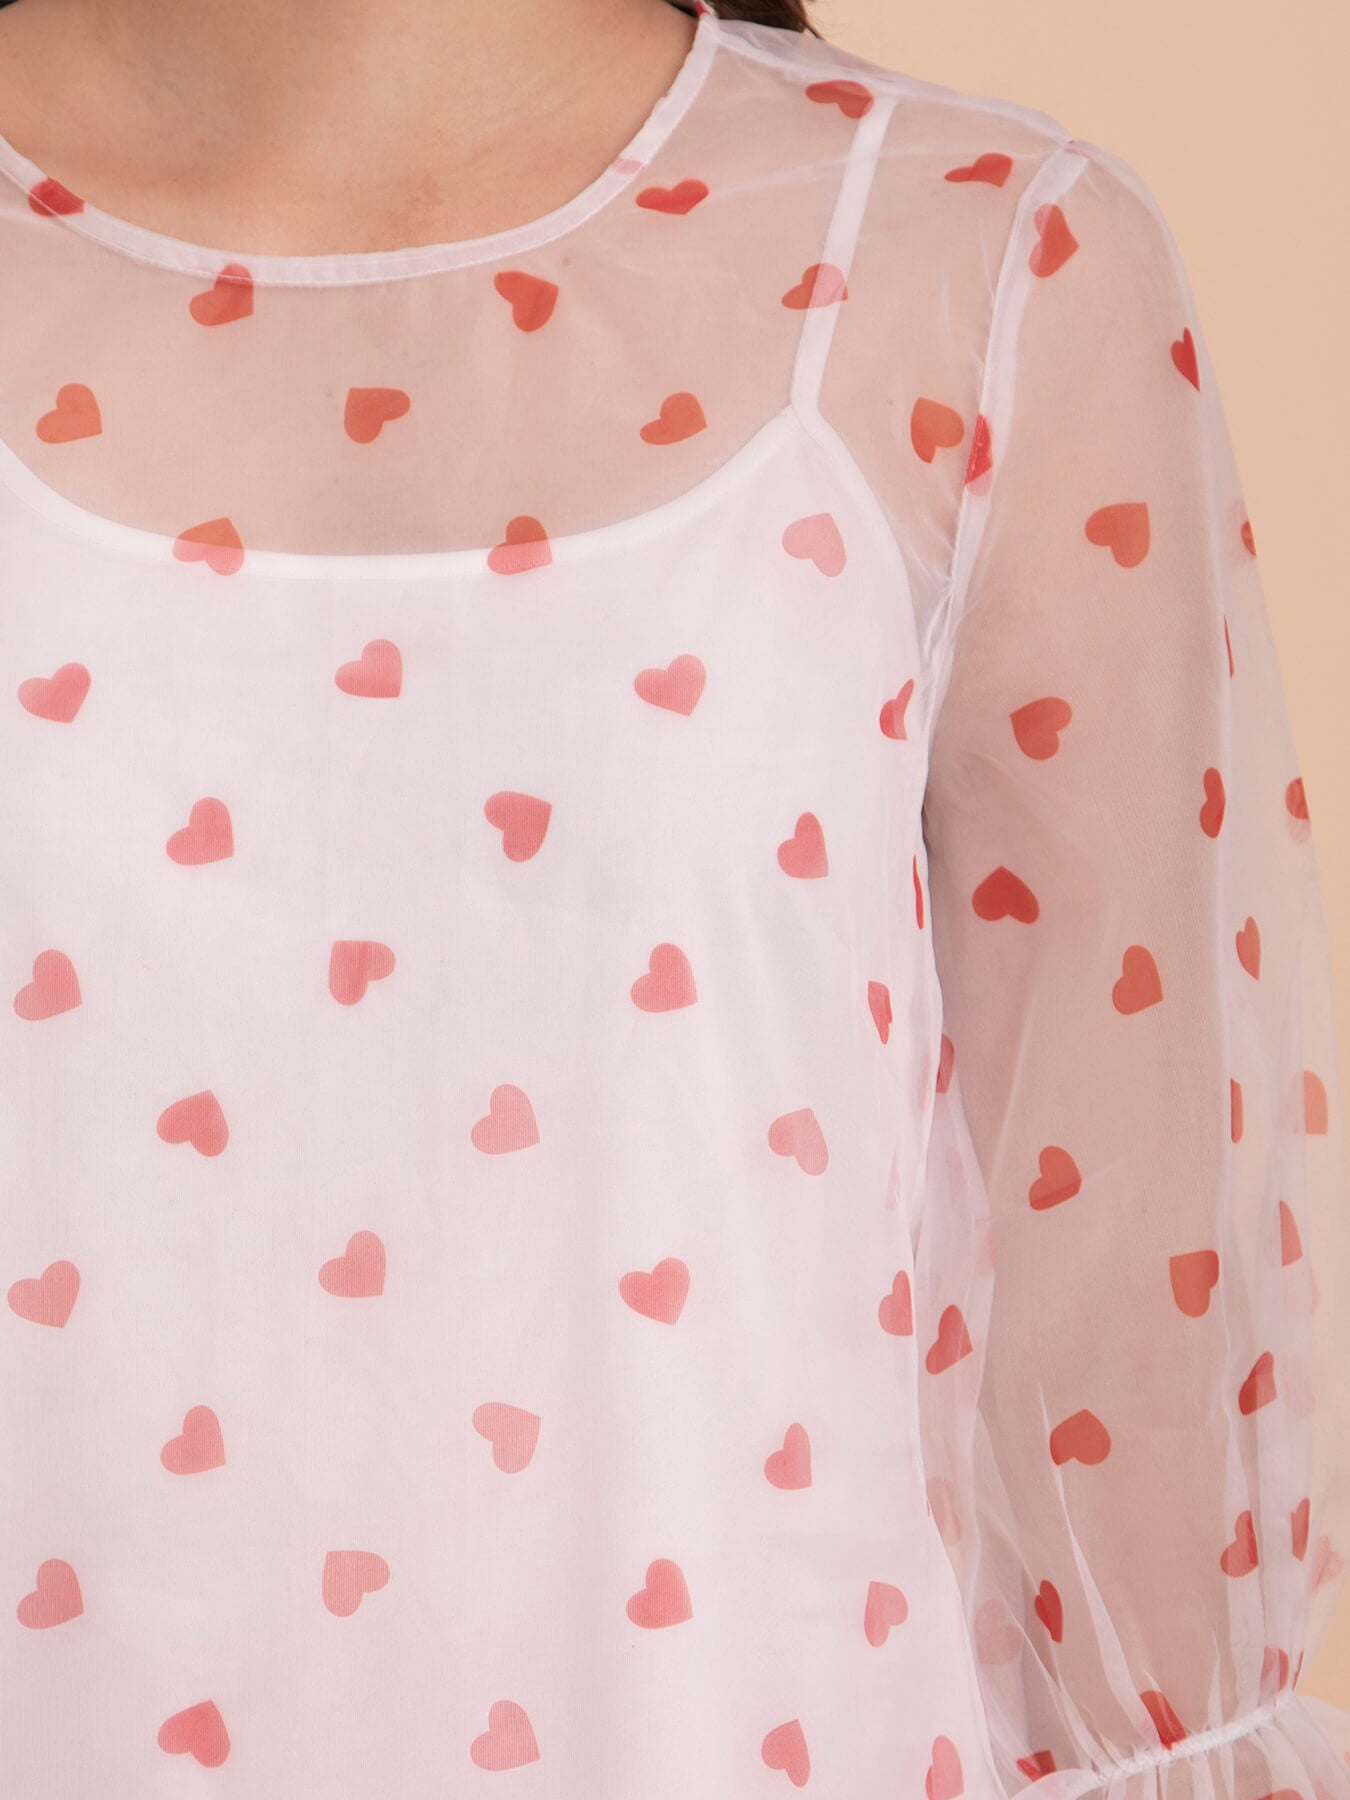 Organza Heart Print Top - White And Red